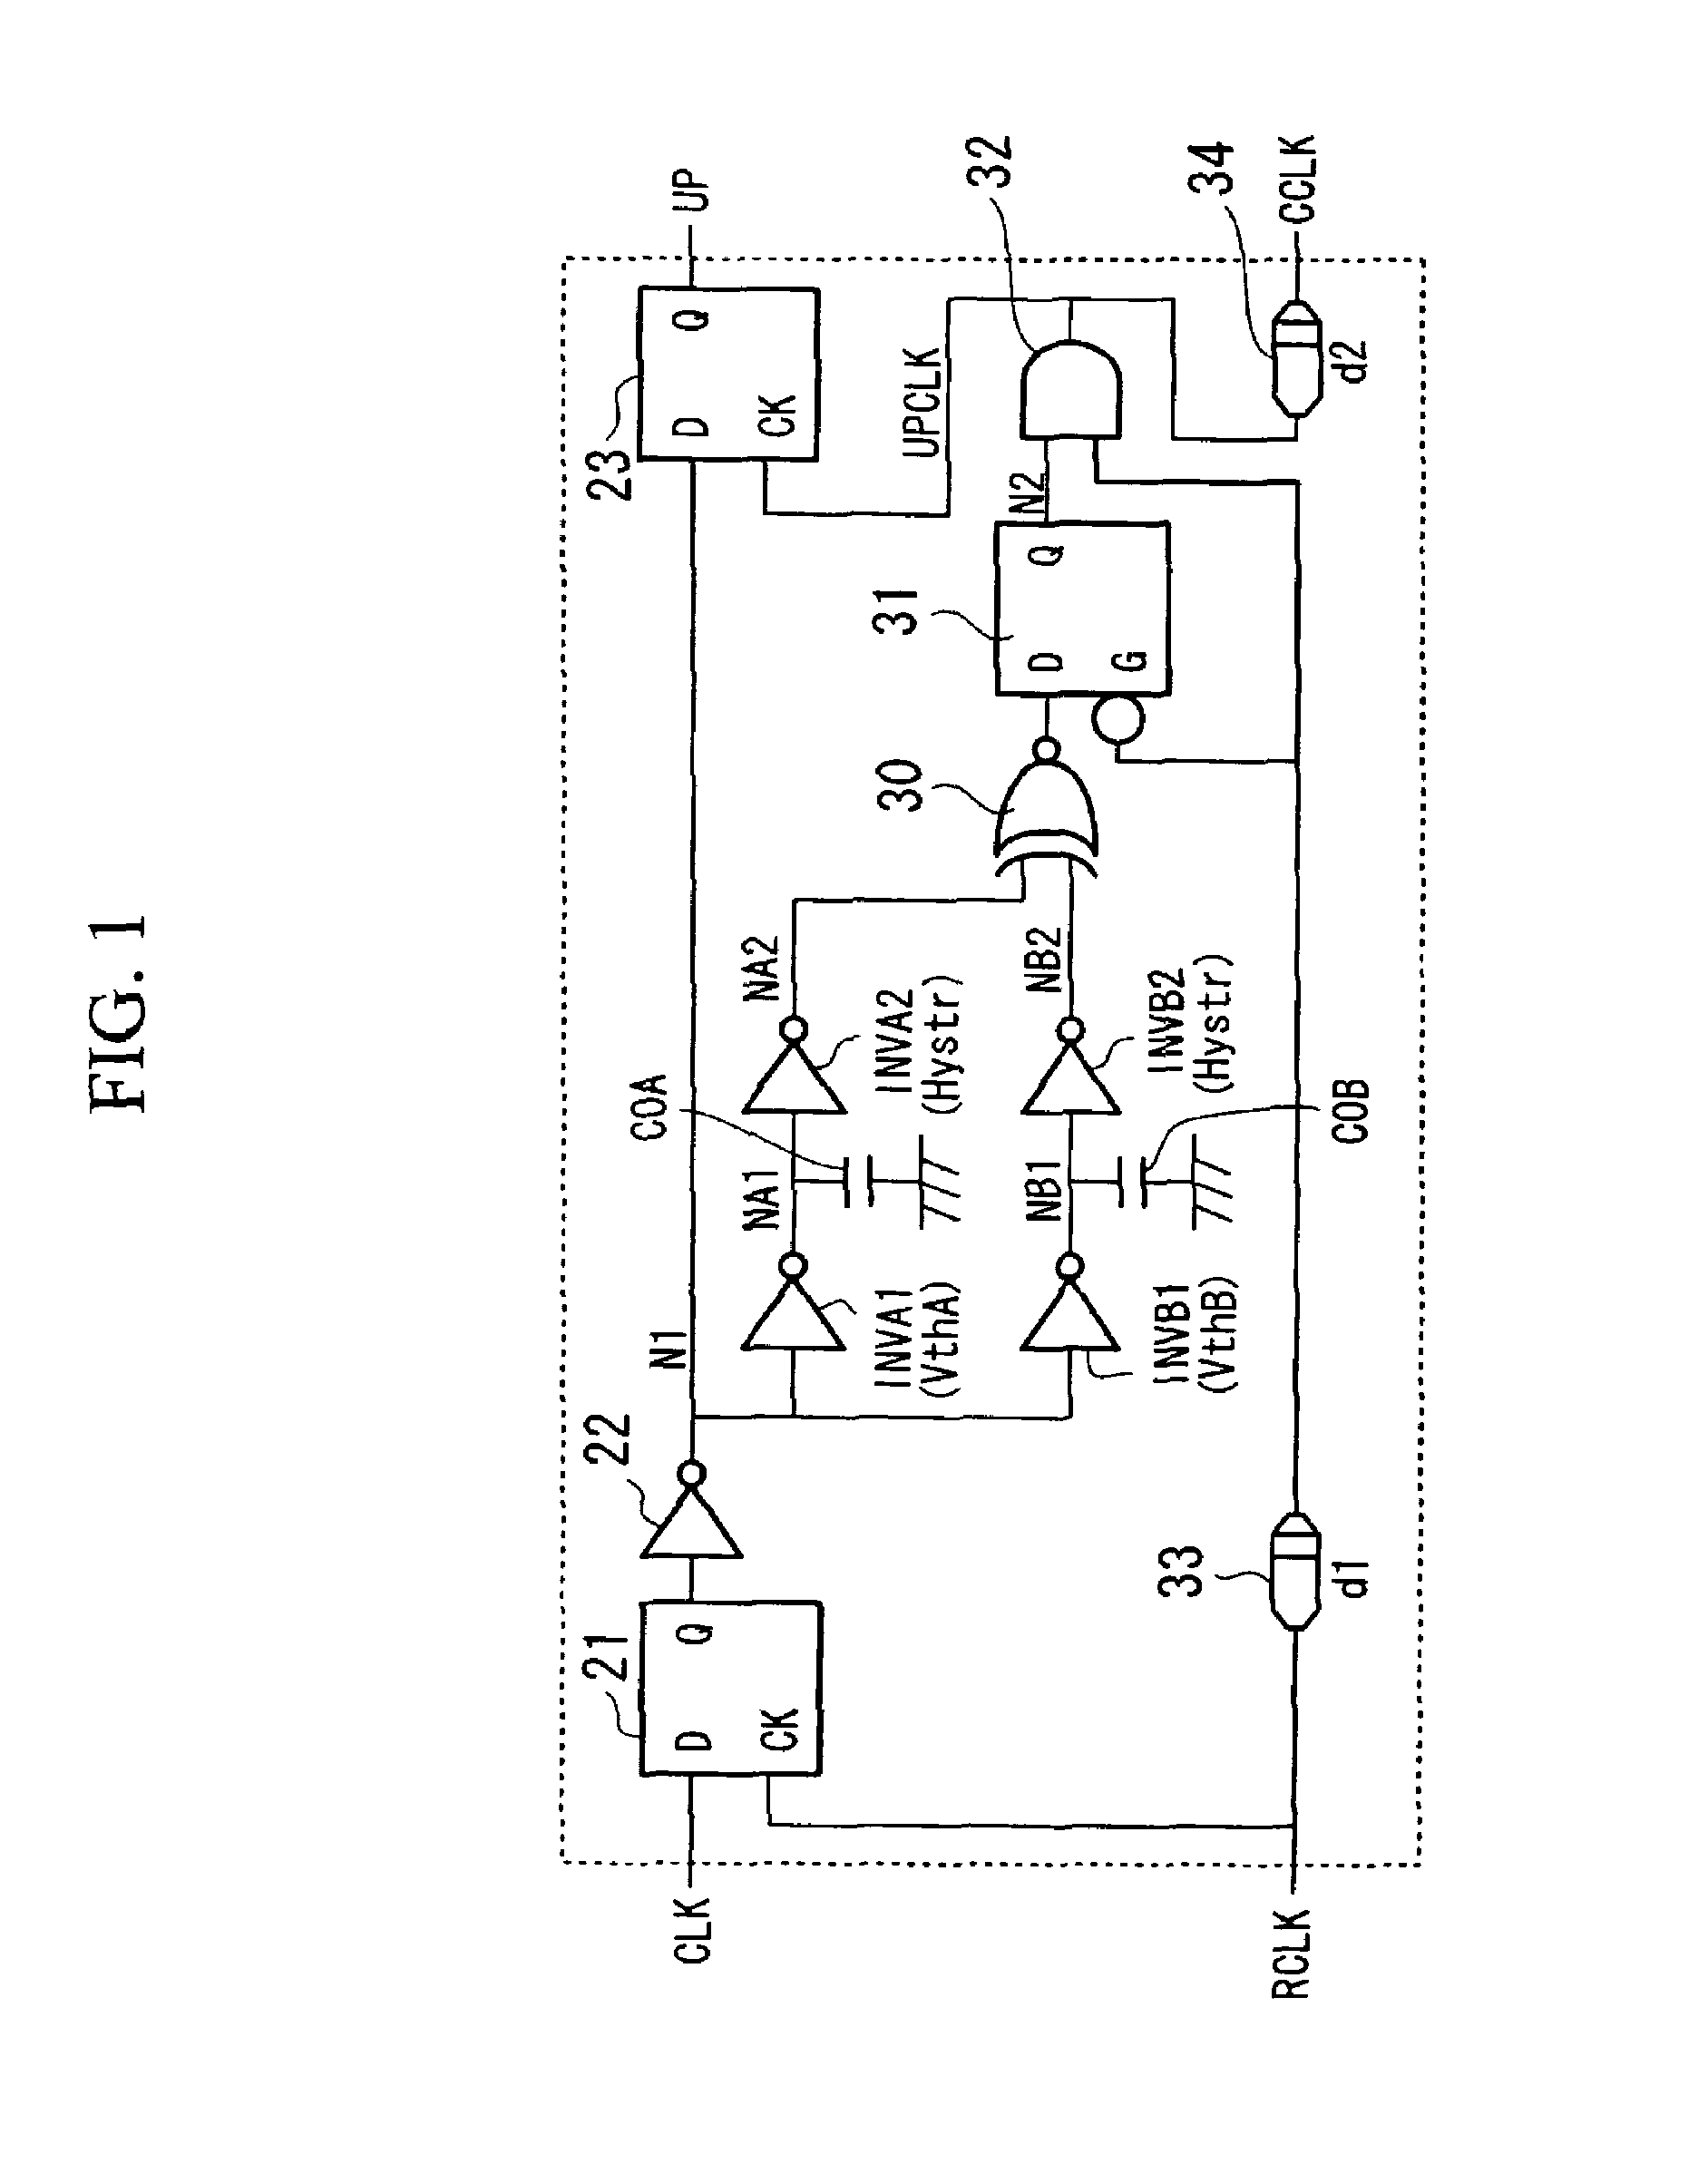 Metastable-resistant phase comparing circuit